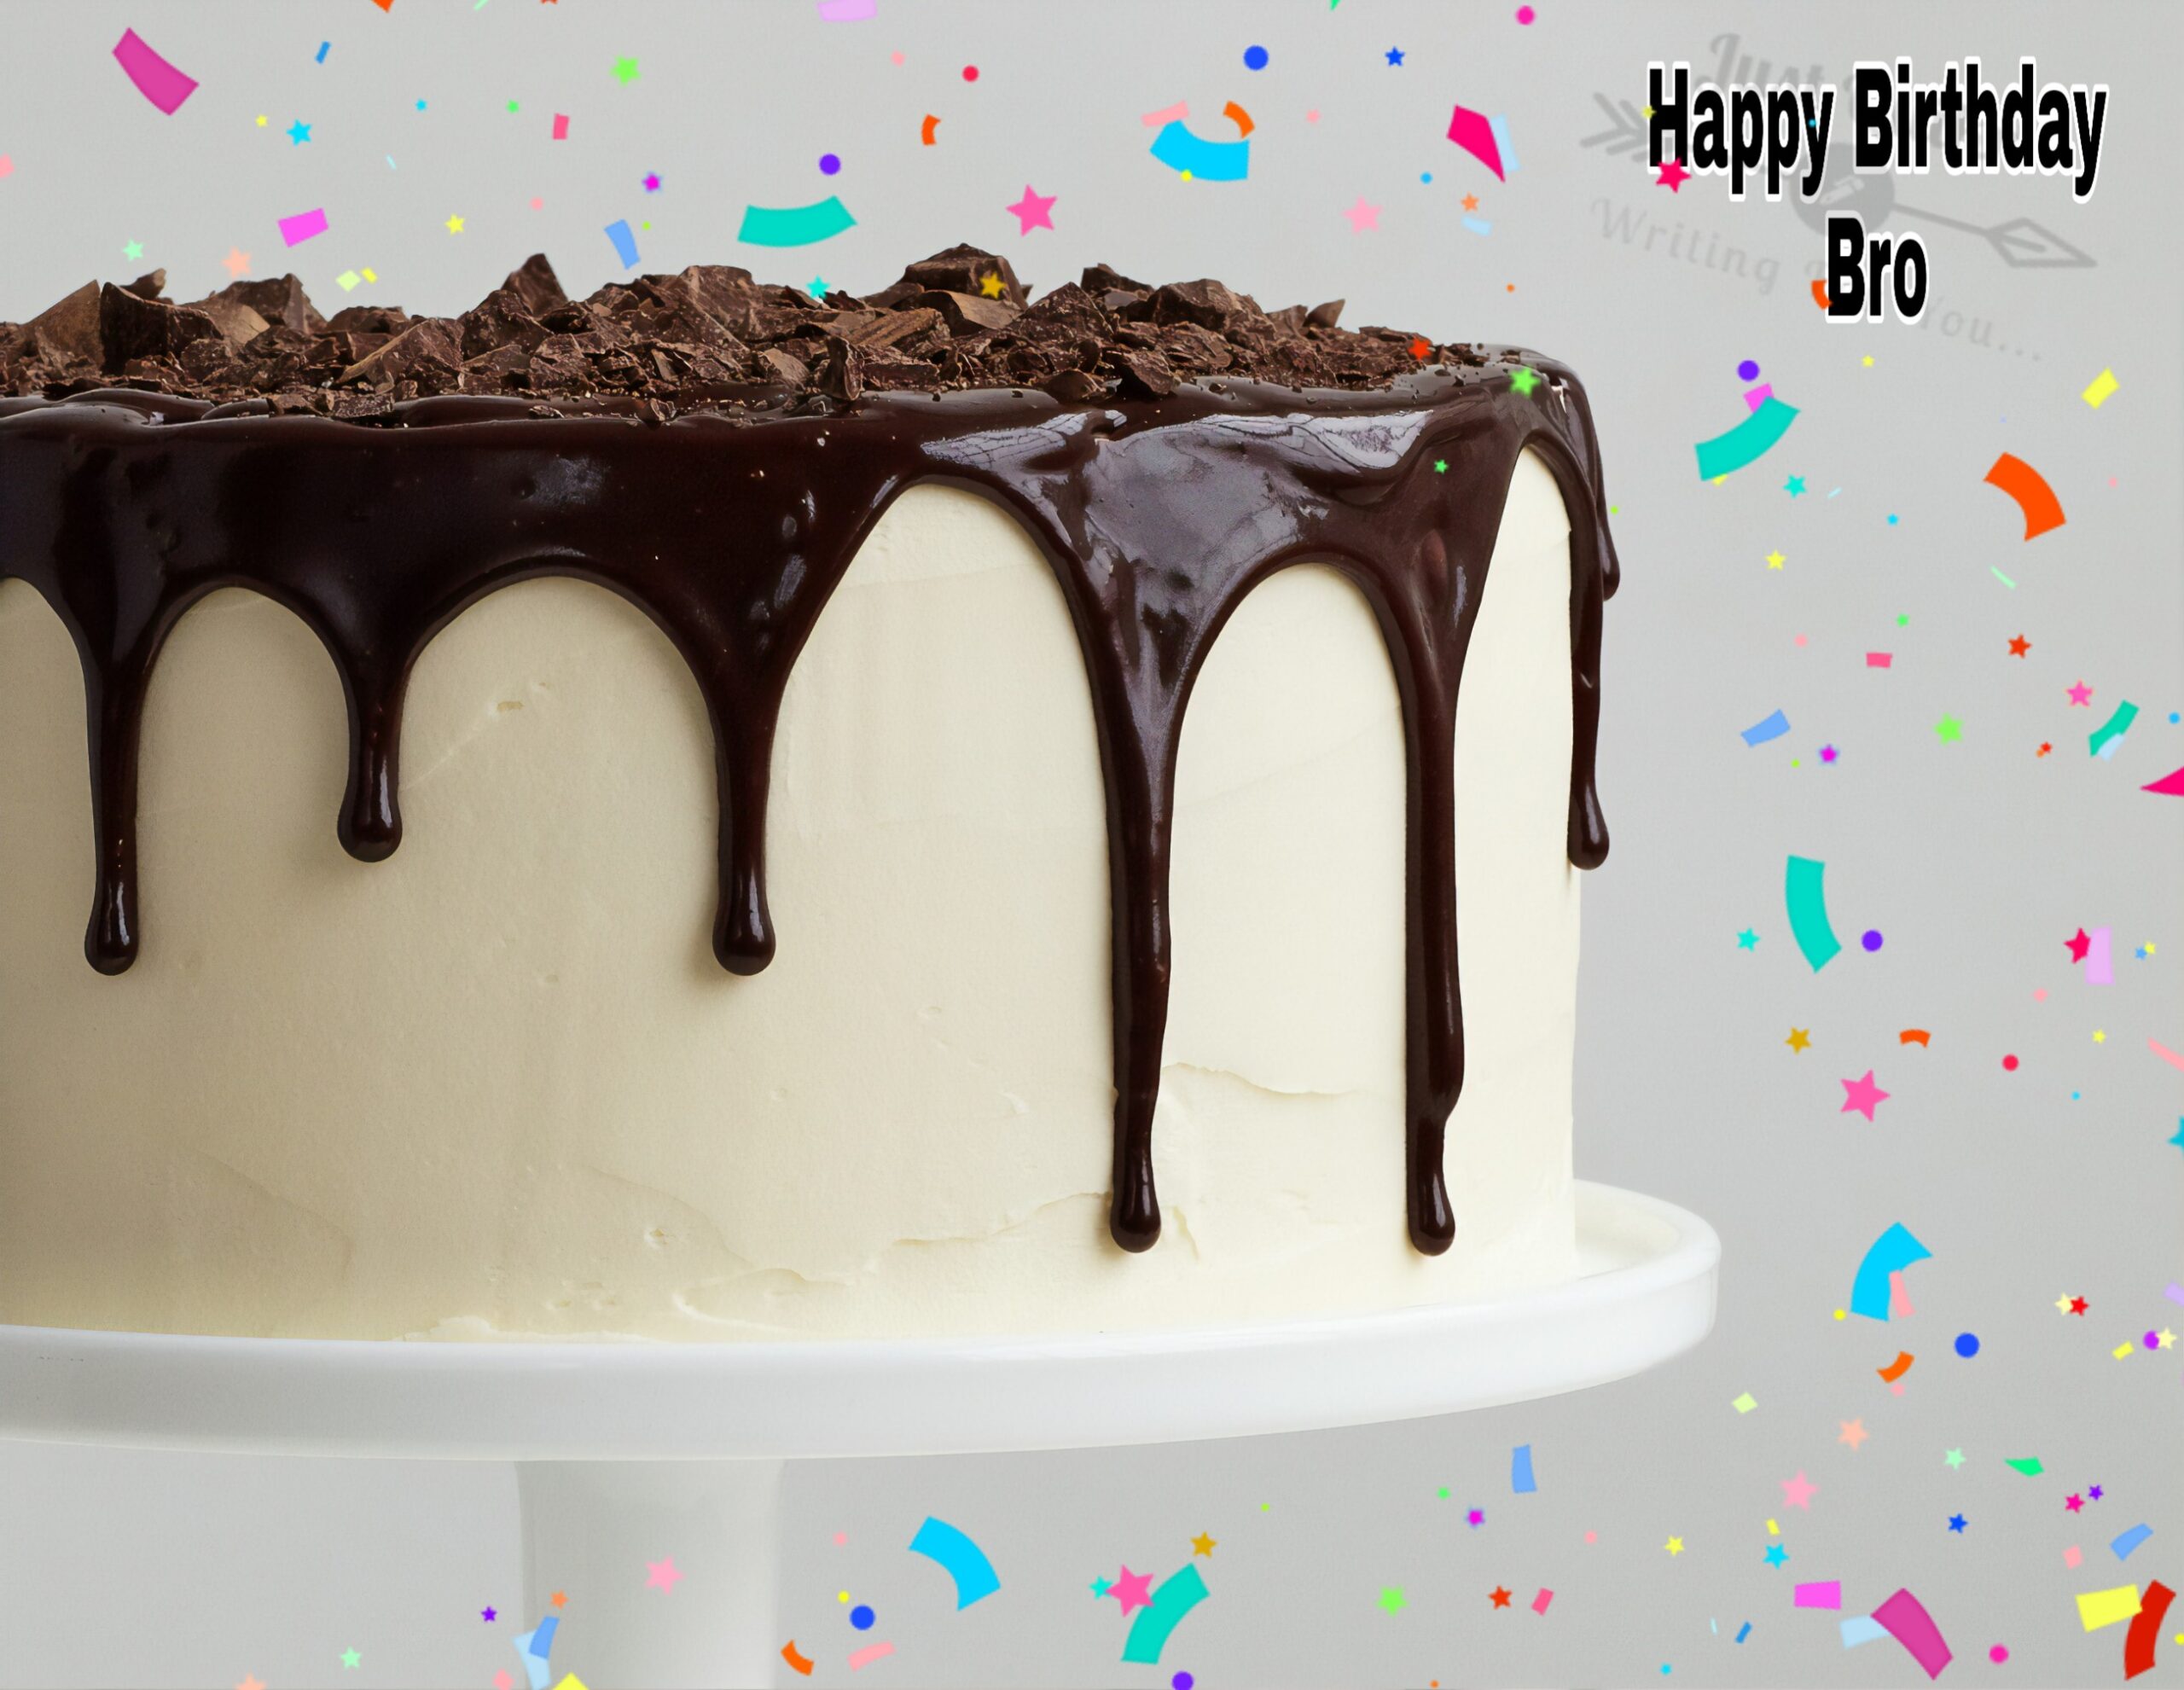 Special Unique Happy Birthday Cake HD Pics Images for Bro